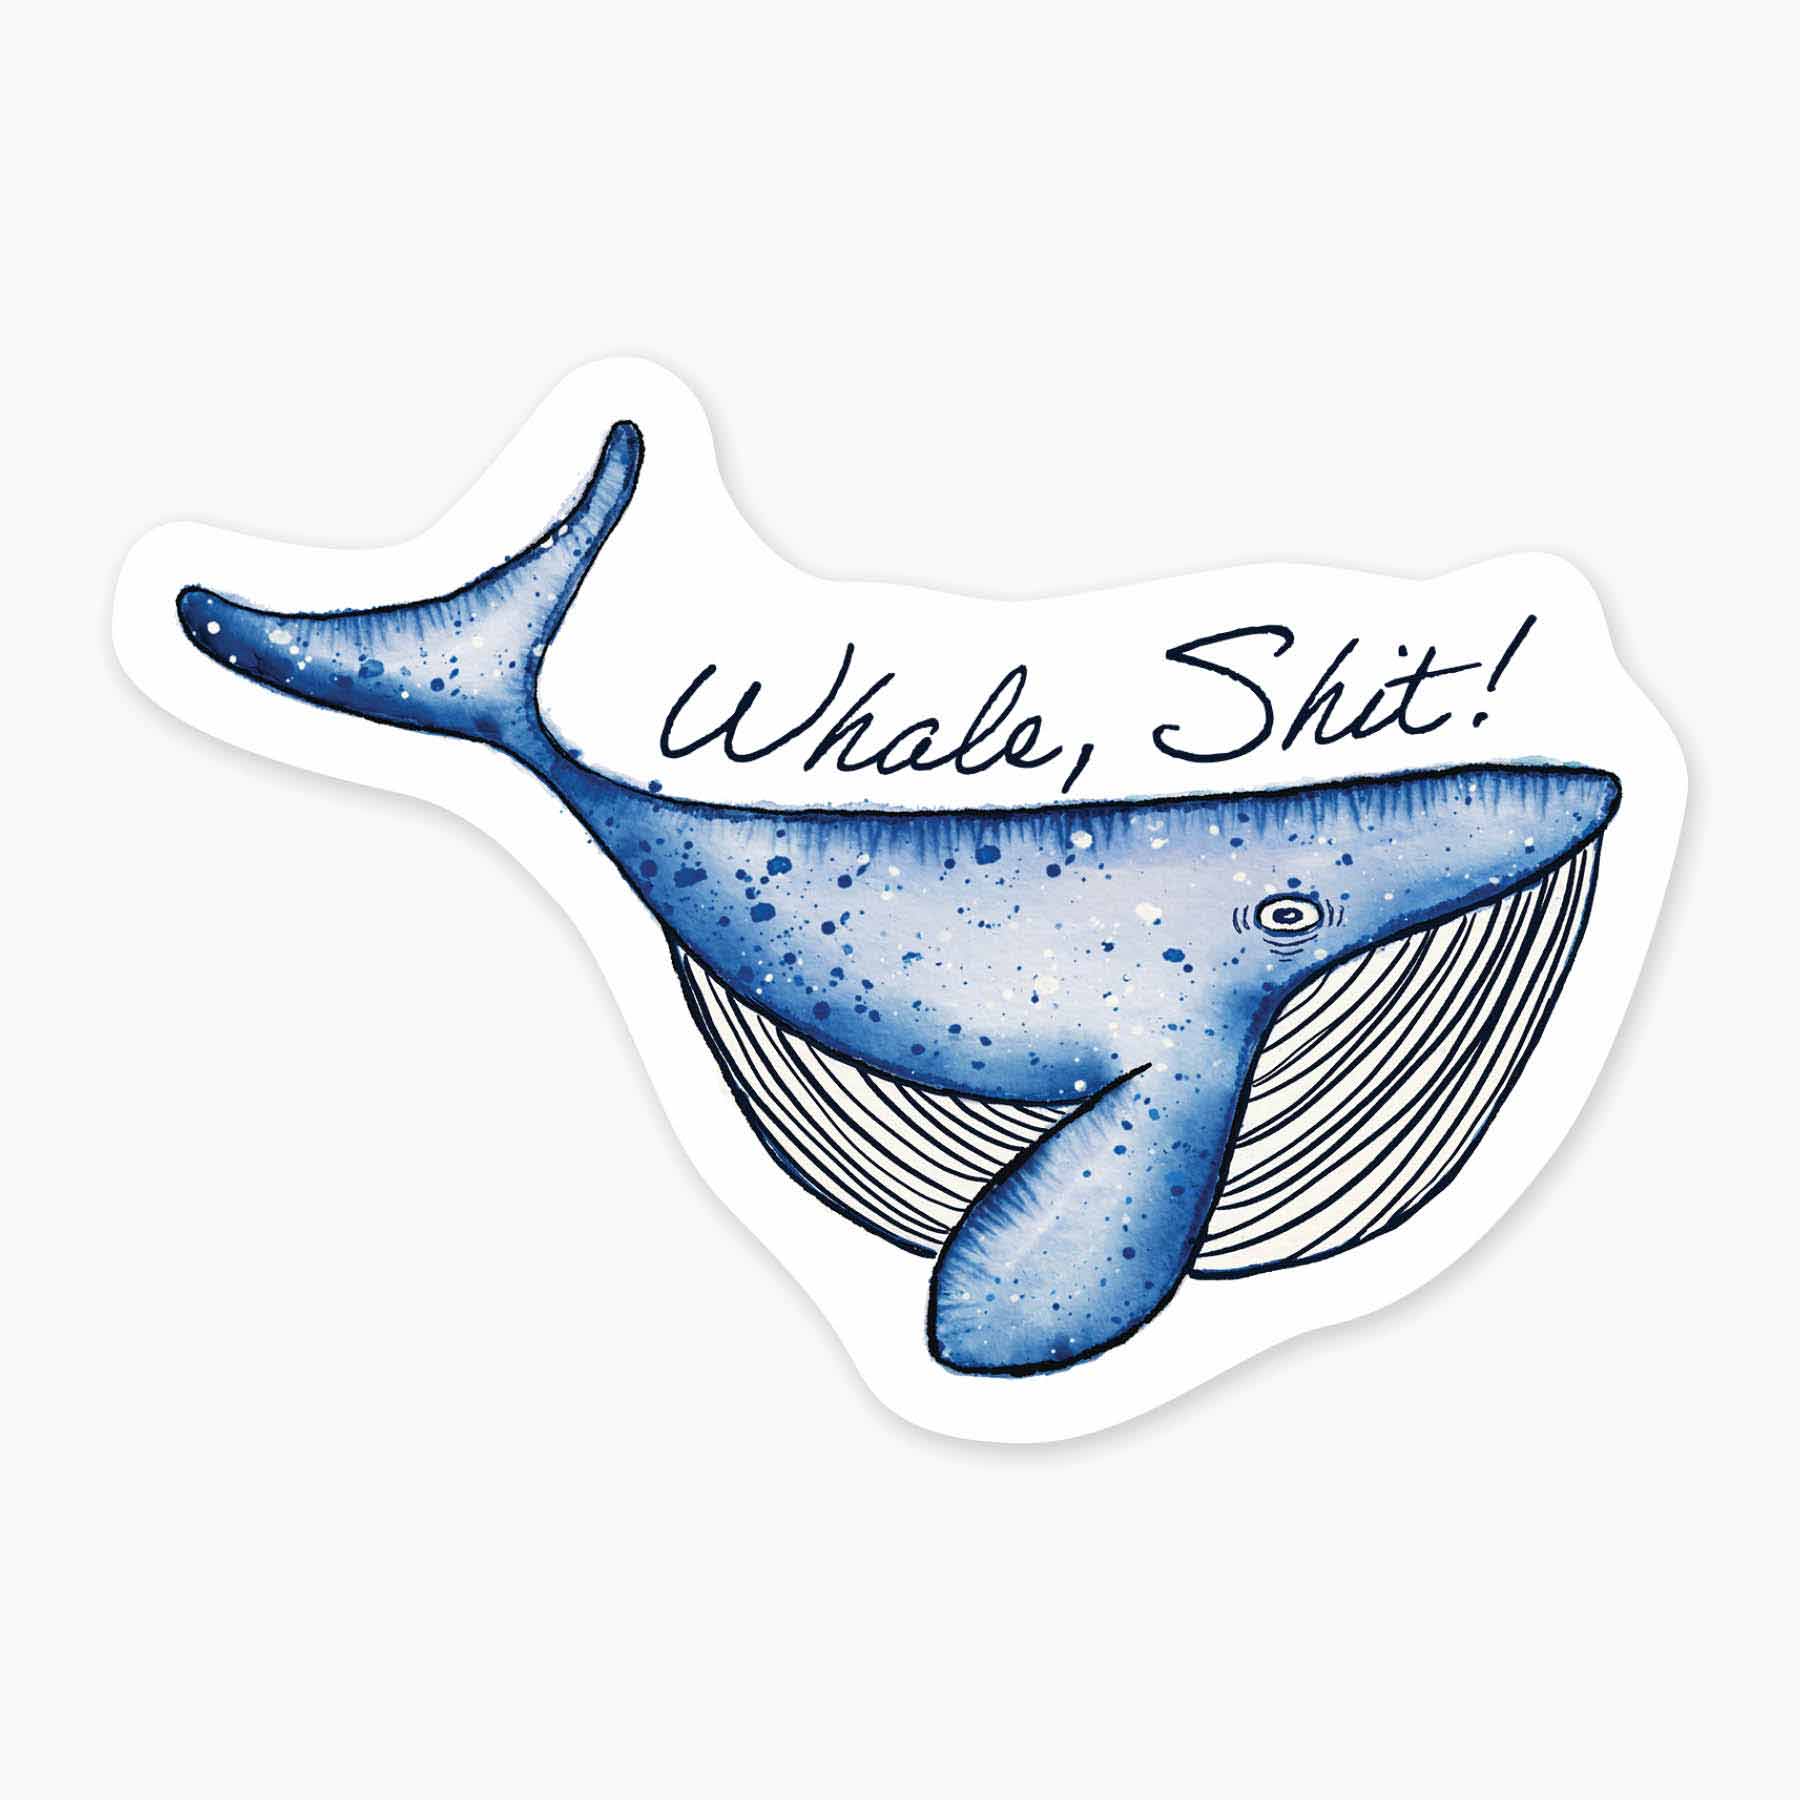 Wild whale saying bad words while fleeing a harpoon Long Sleeve T Shirt by  Zoo&co on Society6 Products